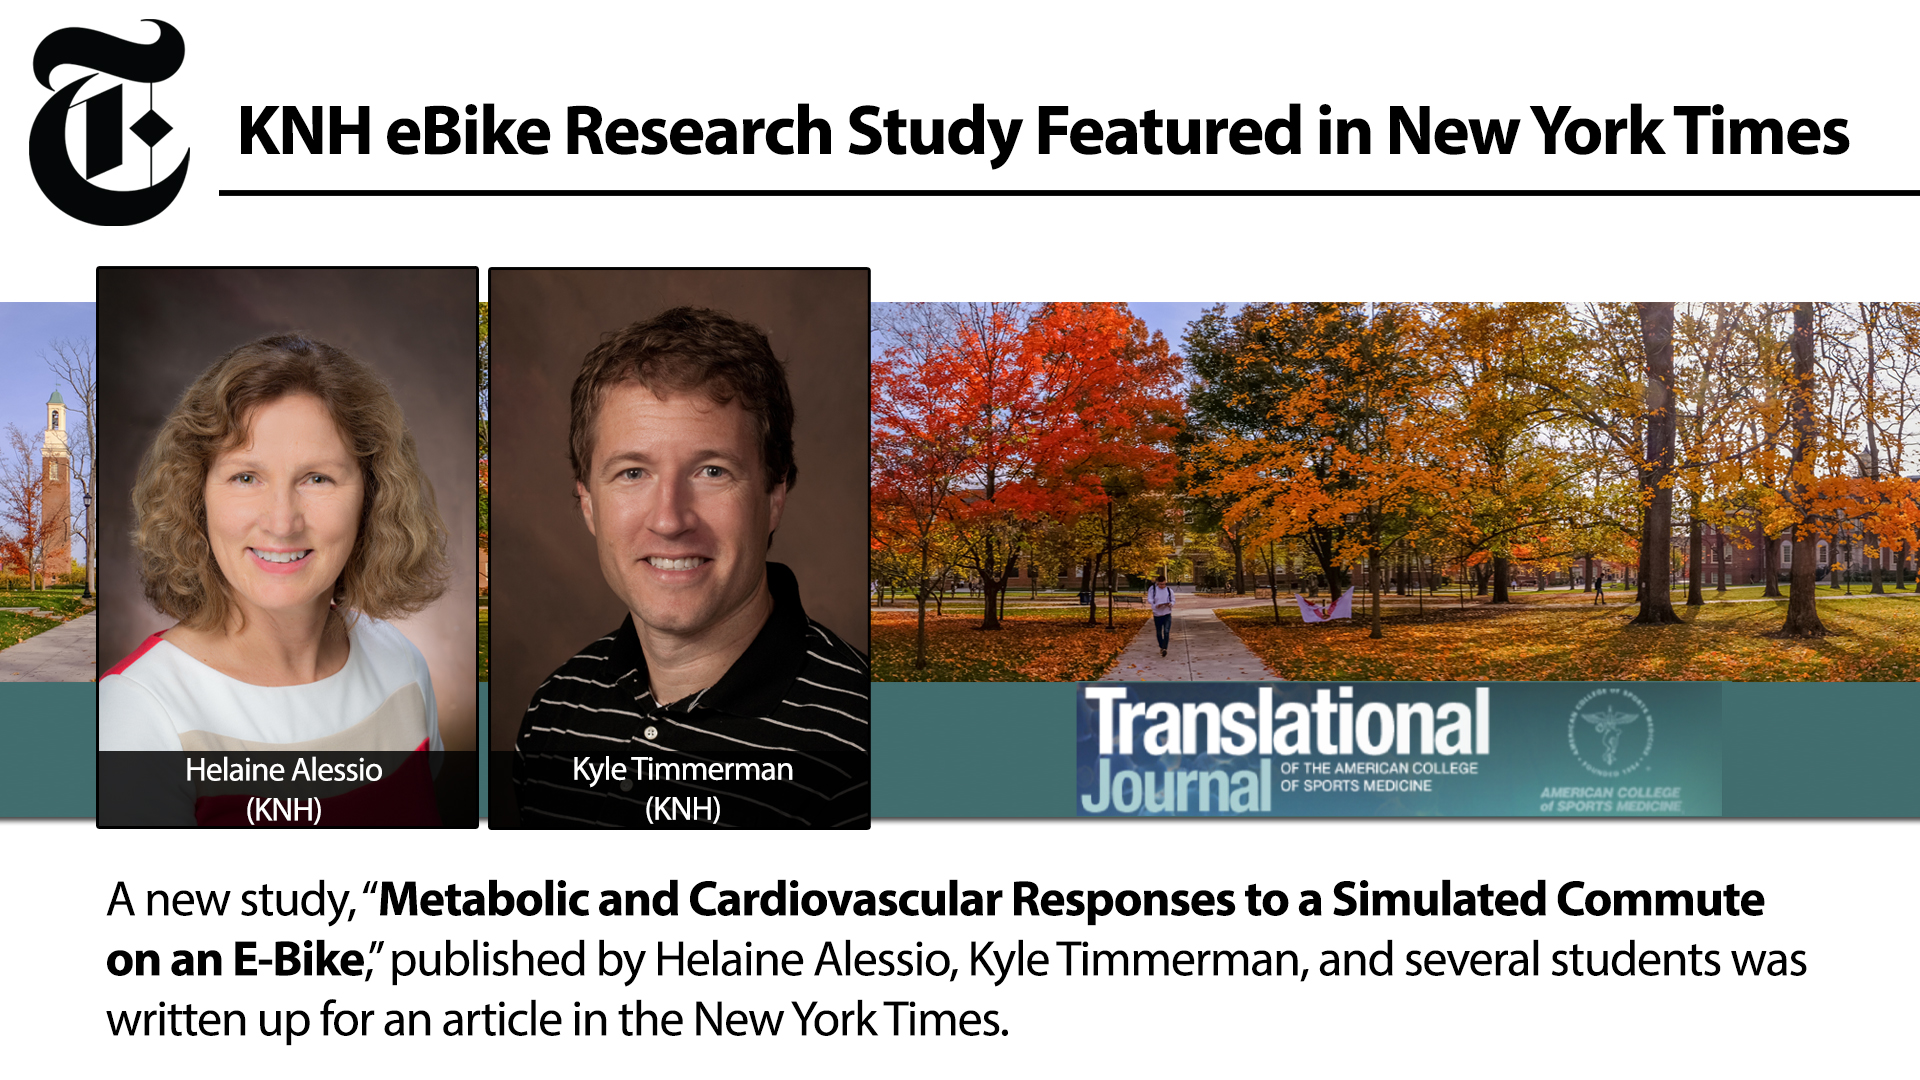 KNH eBike Research Study Featured in New York Times